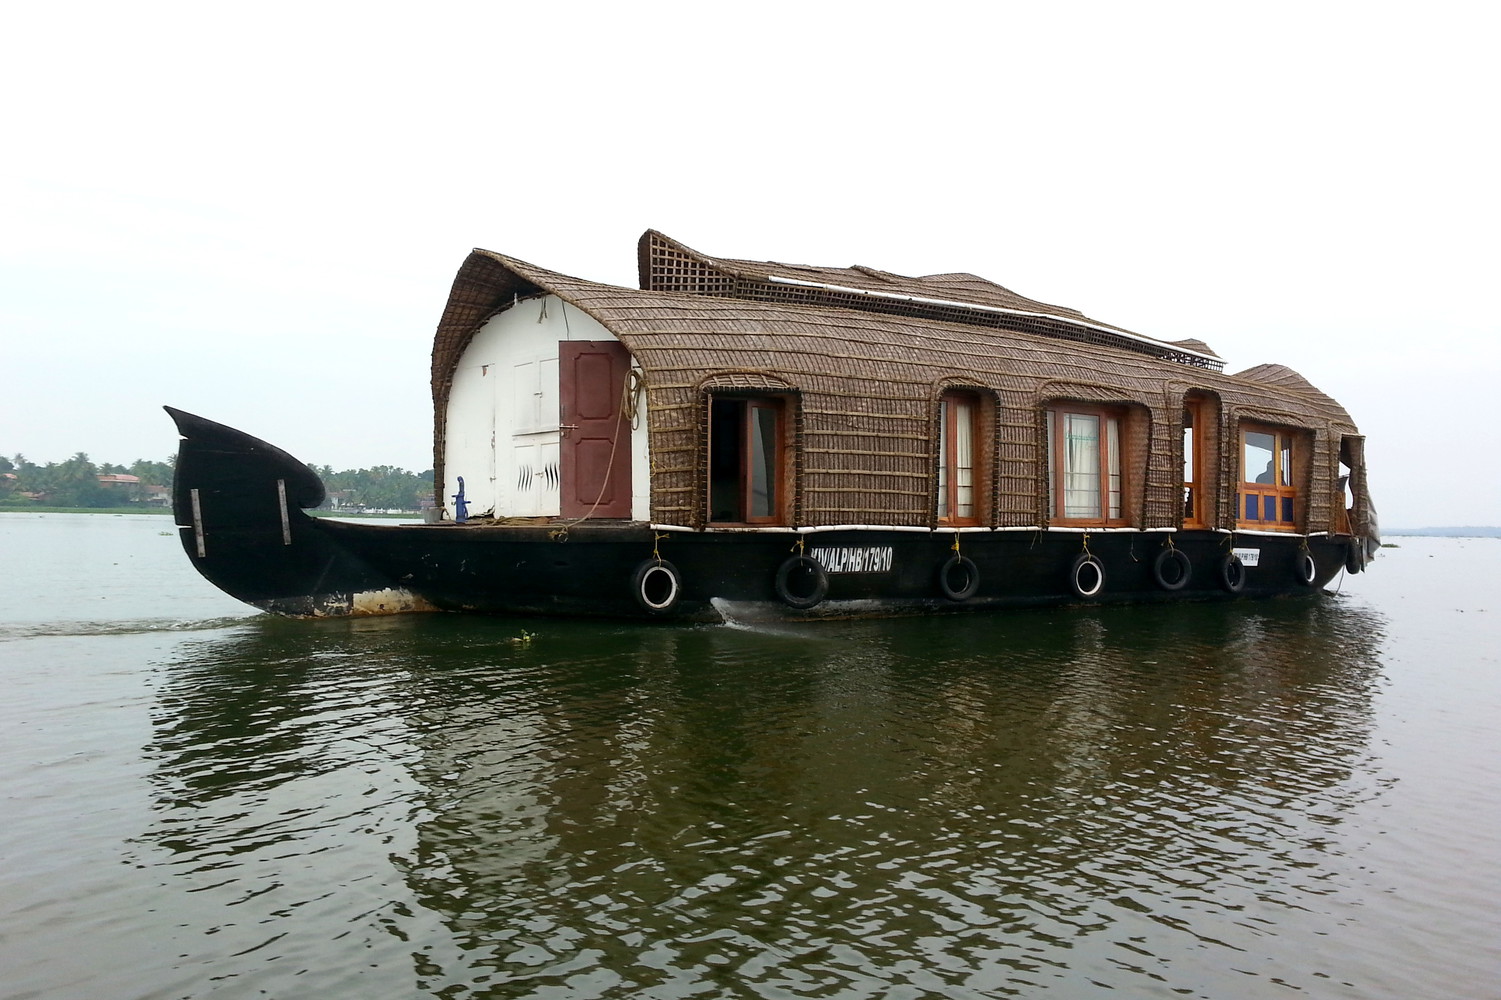 A houseboat with large wooden windows floating on the backwaters